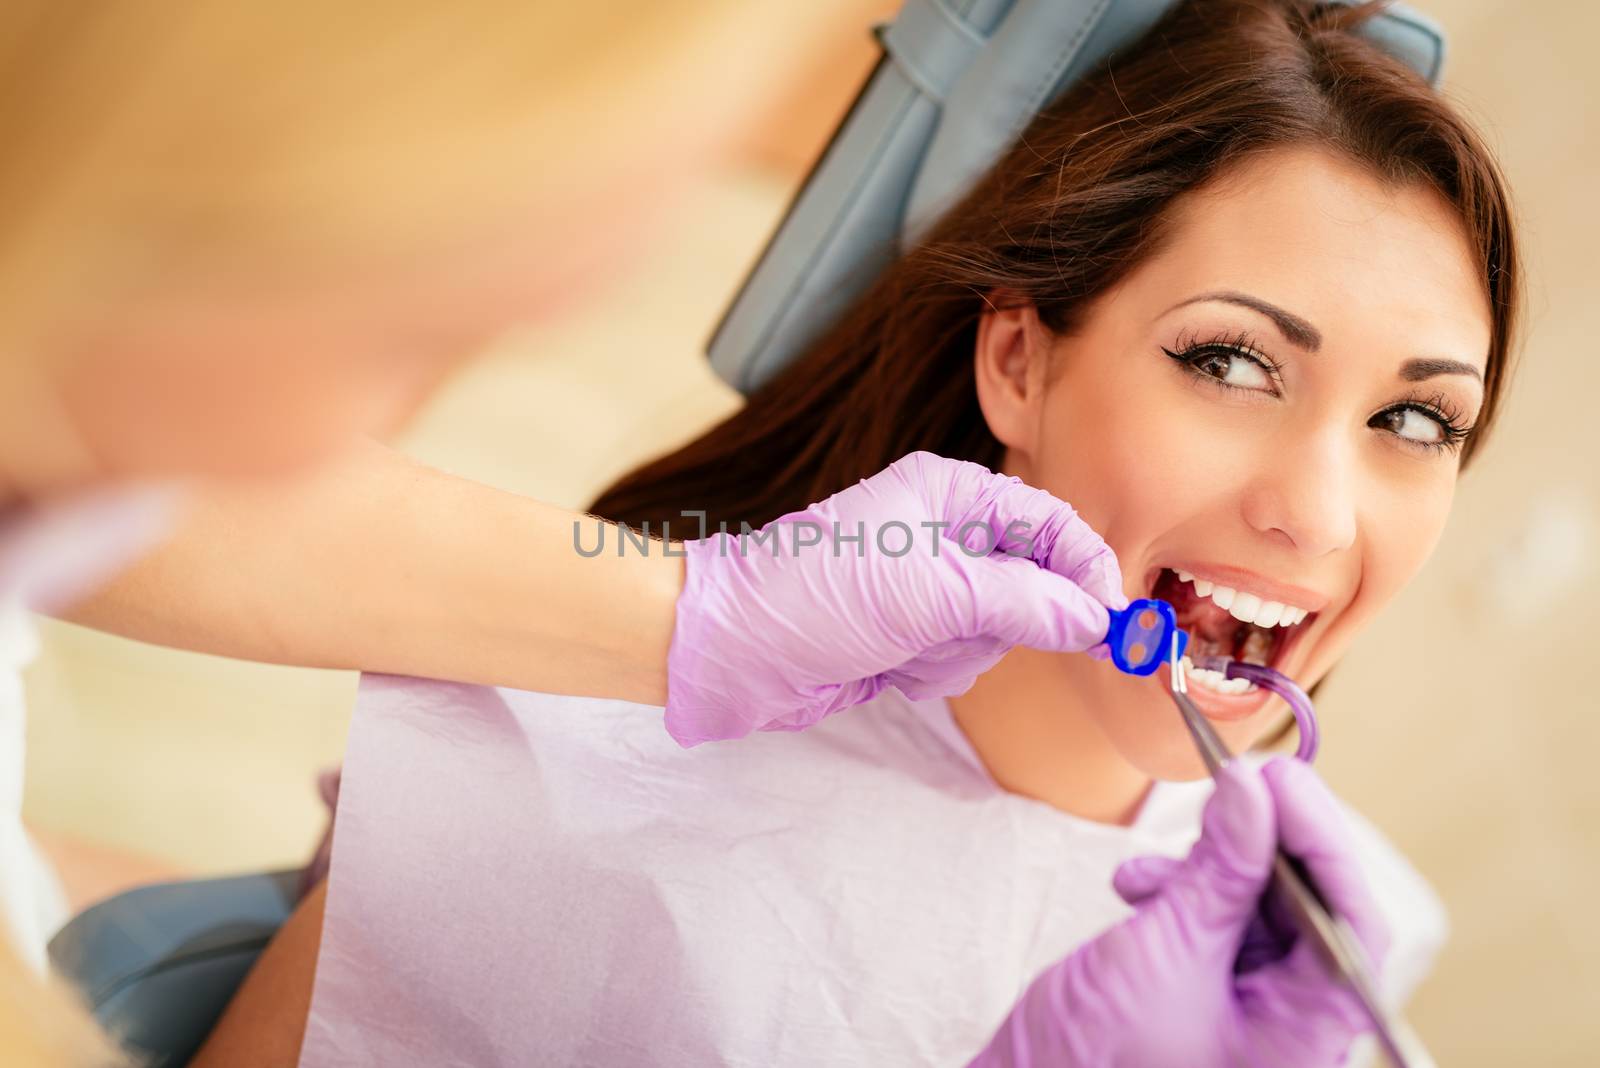 Beautiful young woman in visit at the dentist office. She is sitting on a chair and dentist repair teeth on her. Selective focus.